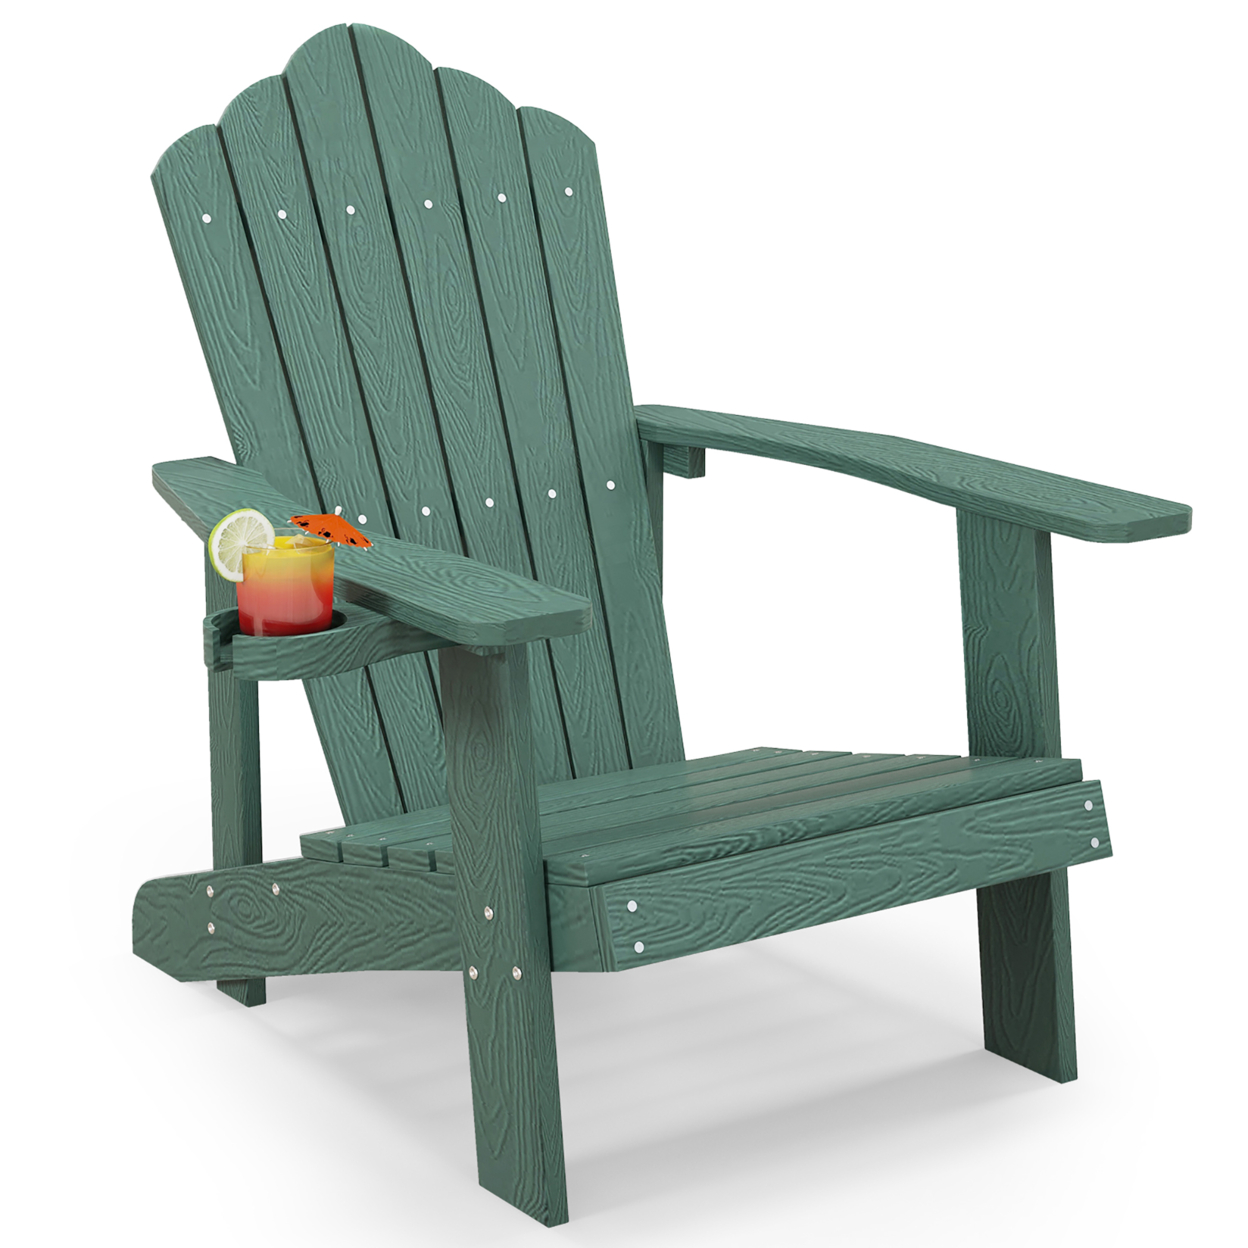 Patio HIPS Outdoor Weather Resistant Slatted Chair Adirondack Chair W/ Cup Holder - Dark Green